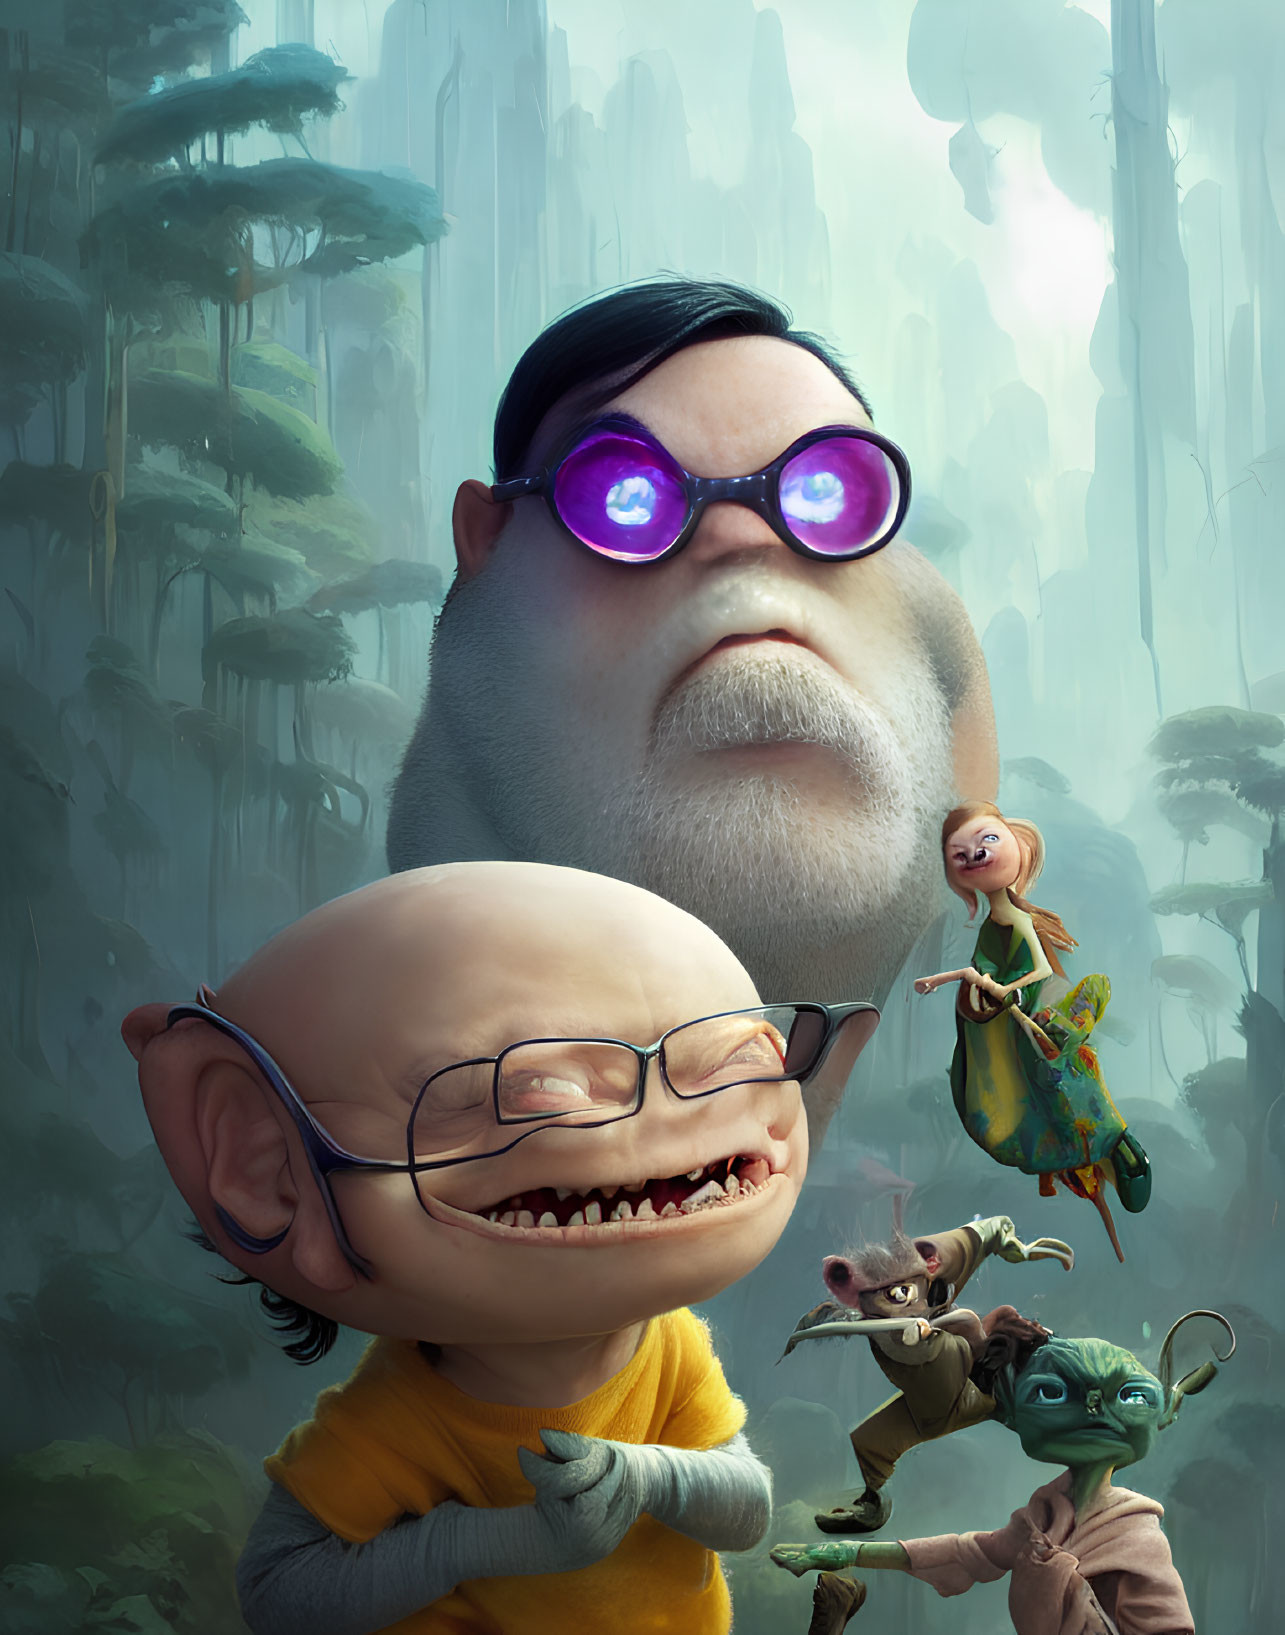 Illustration of floating giant head, elf, fairy, and Yoda-like character in mystical forest